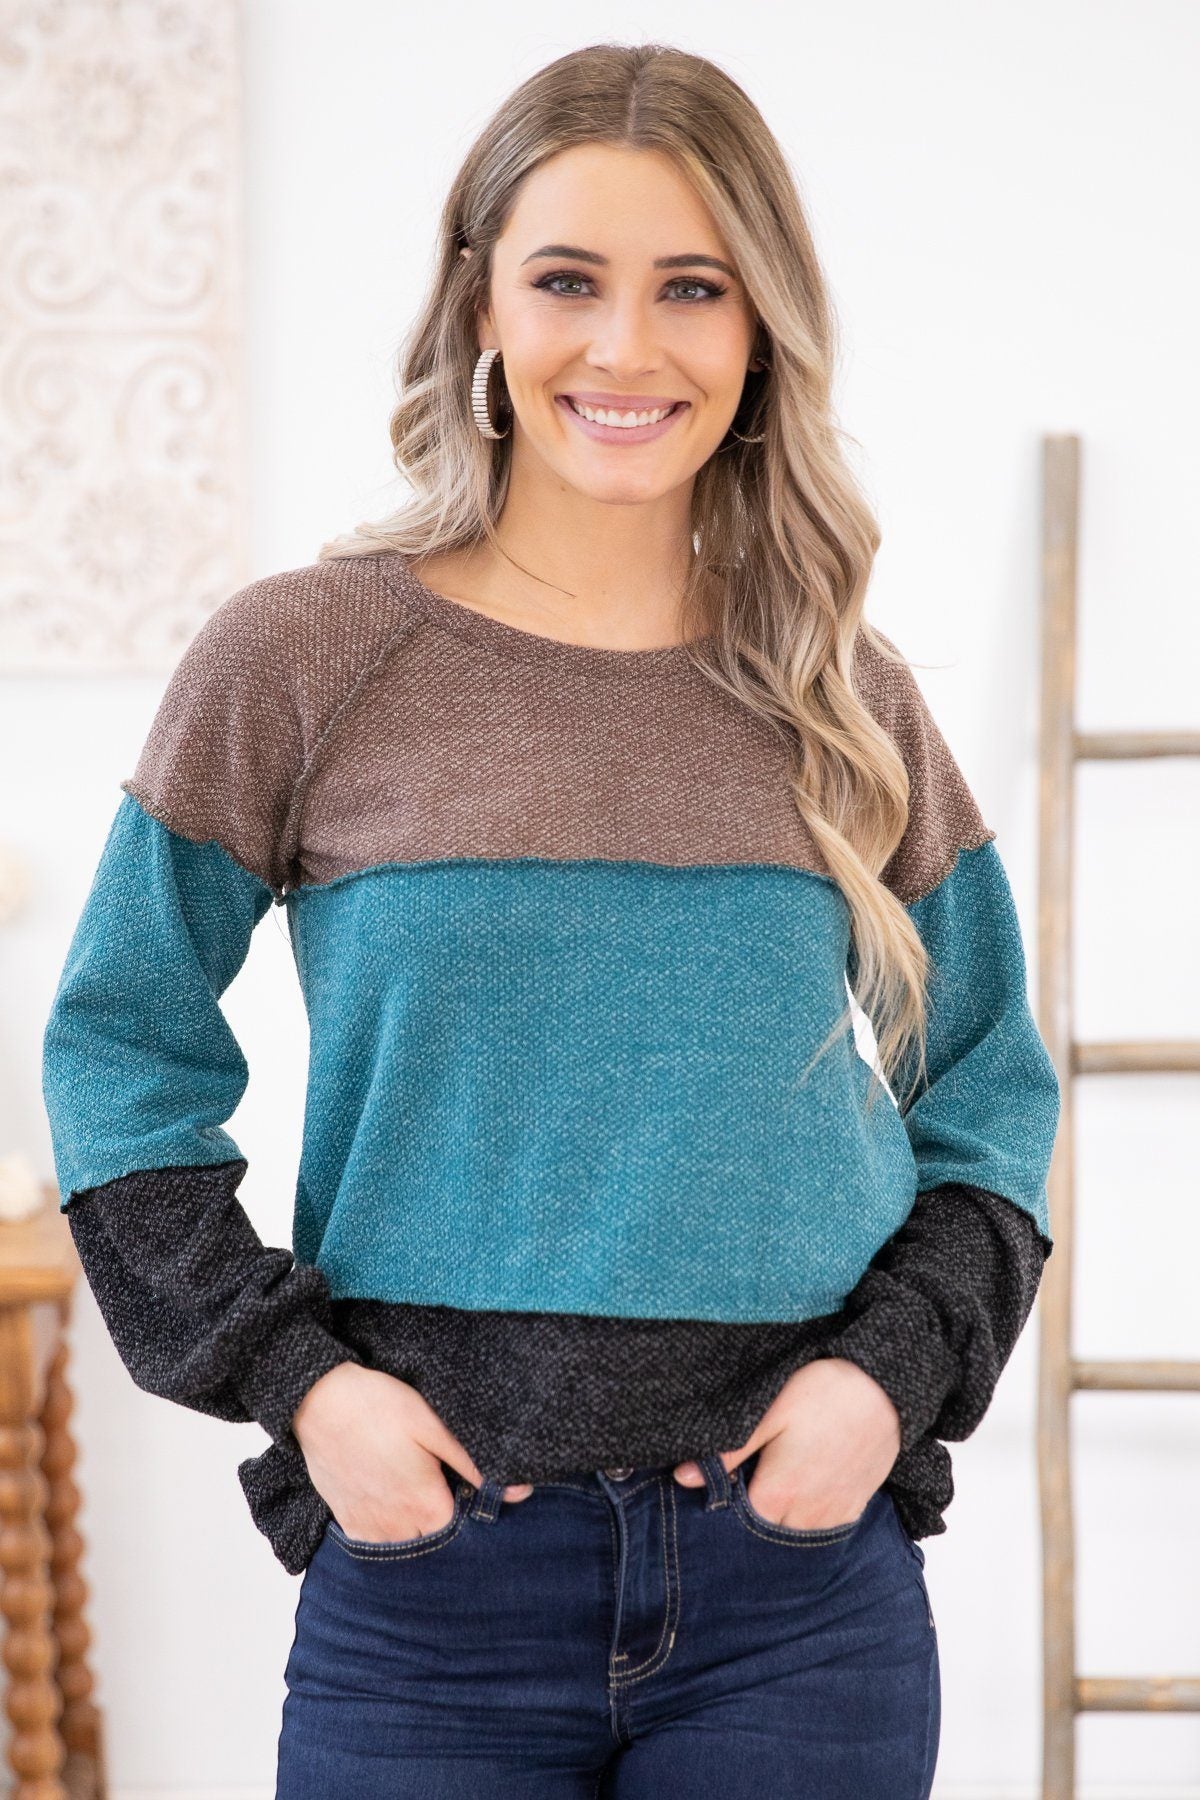 Mocha and Turquoise Colorblock Top - Filly Flair